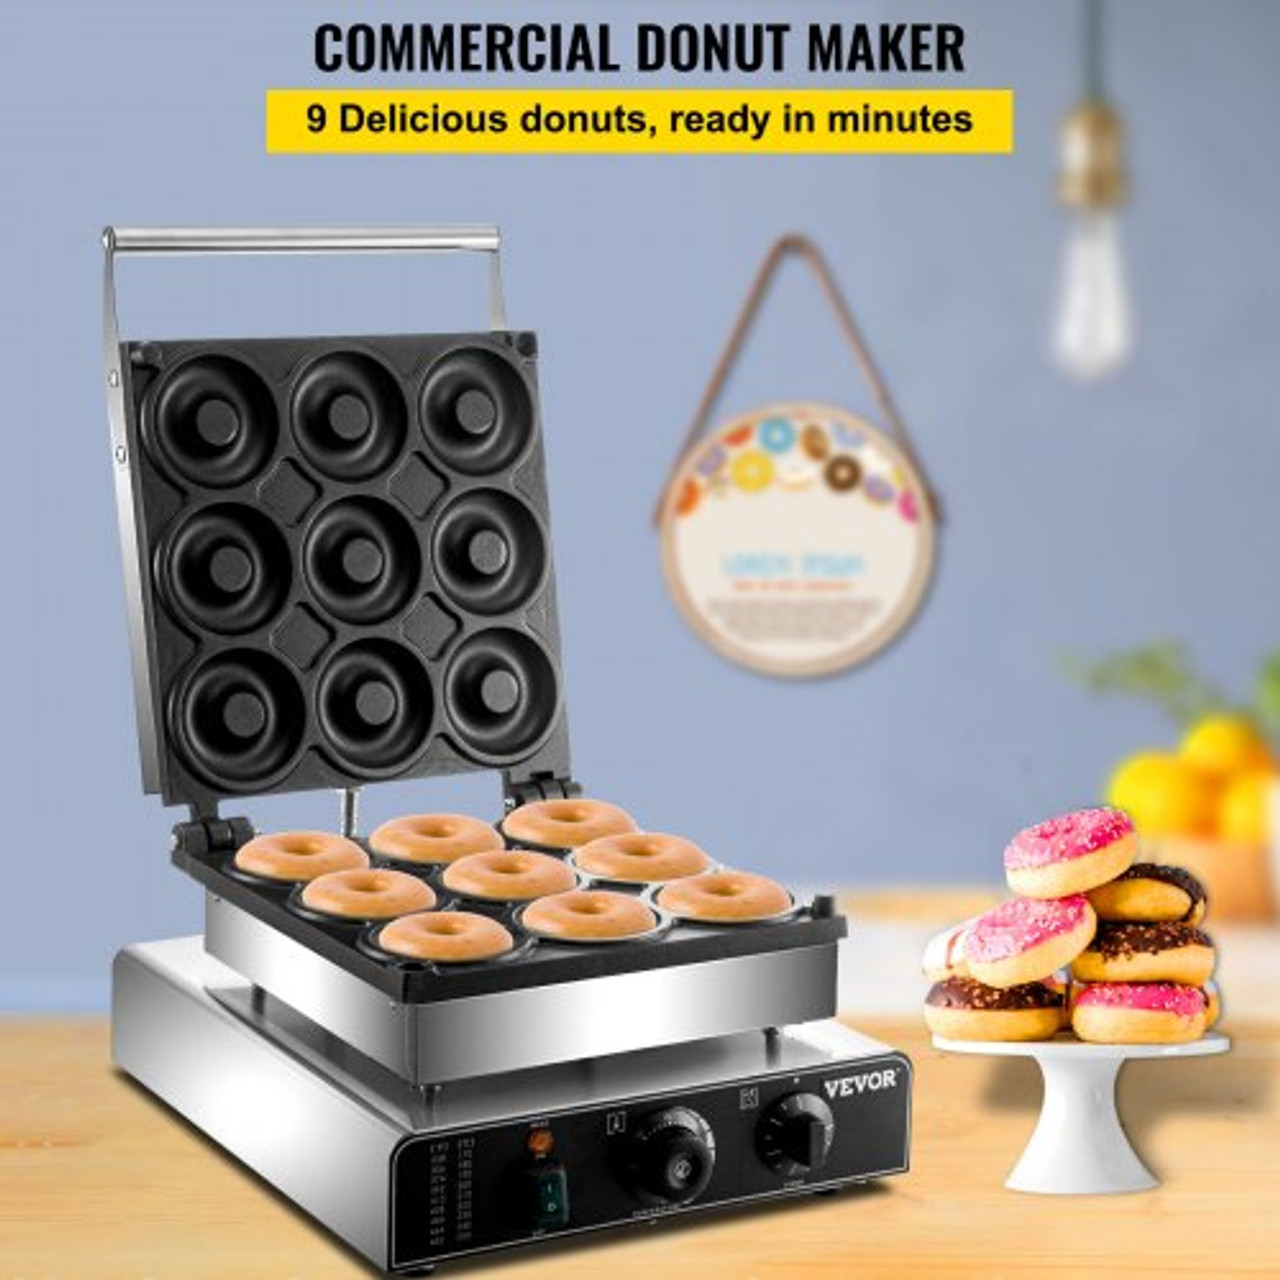 Electric Donut Maker, 9 Holes Commercial Donut Machine, 2000W Electric Doughnut Machine, Double-Sided Heating Commercial Donut Maker, for Home & Commercial Use with Non-stick Teflon Coating